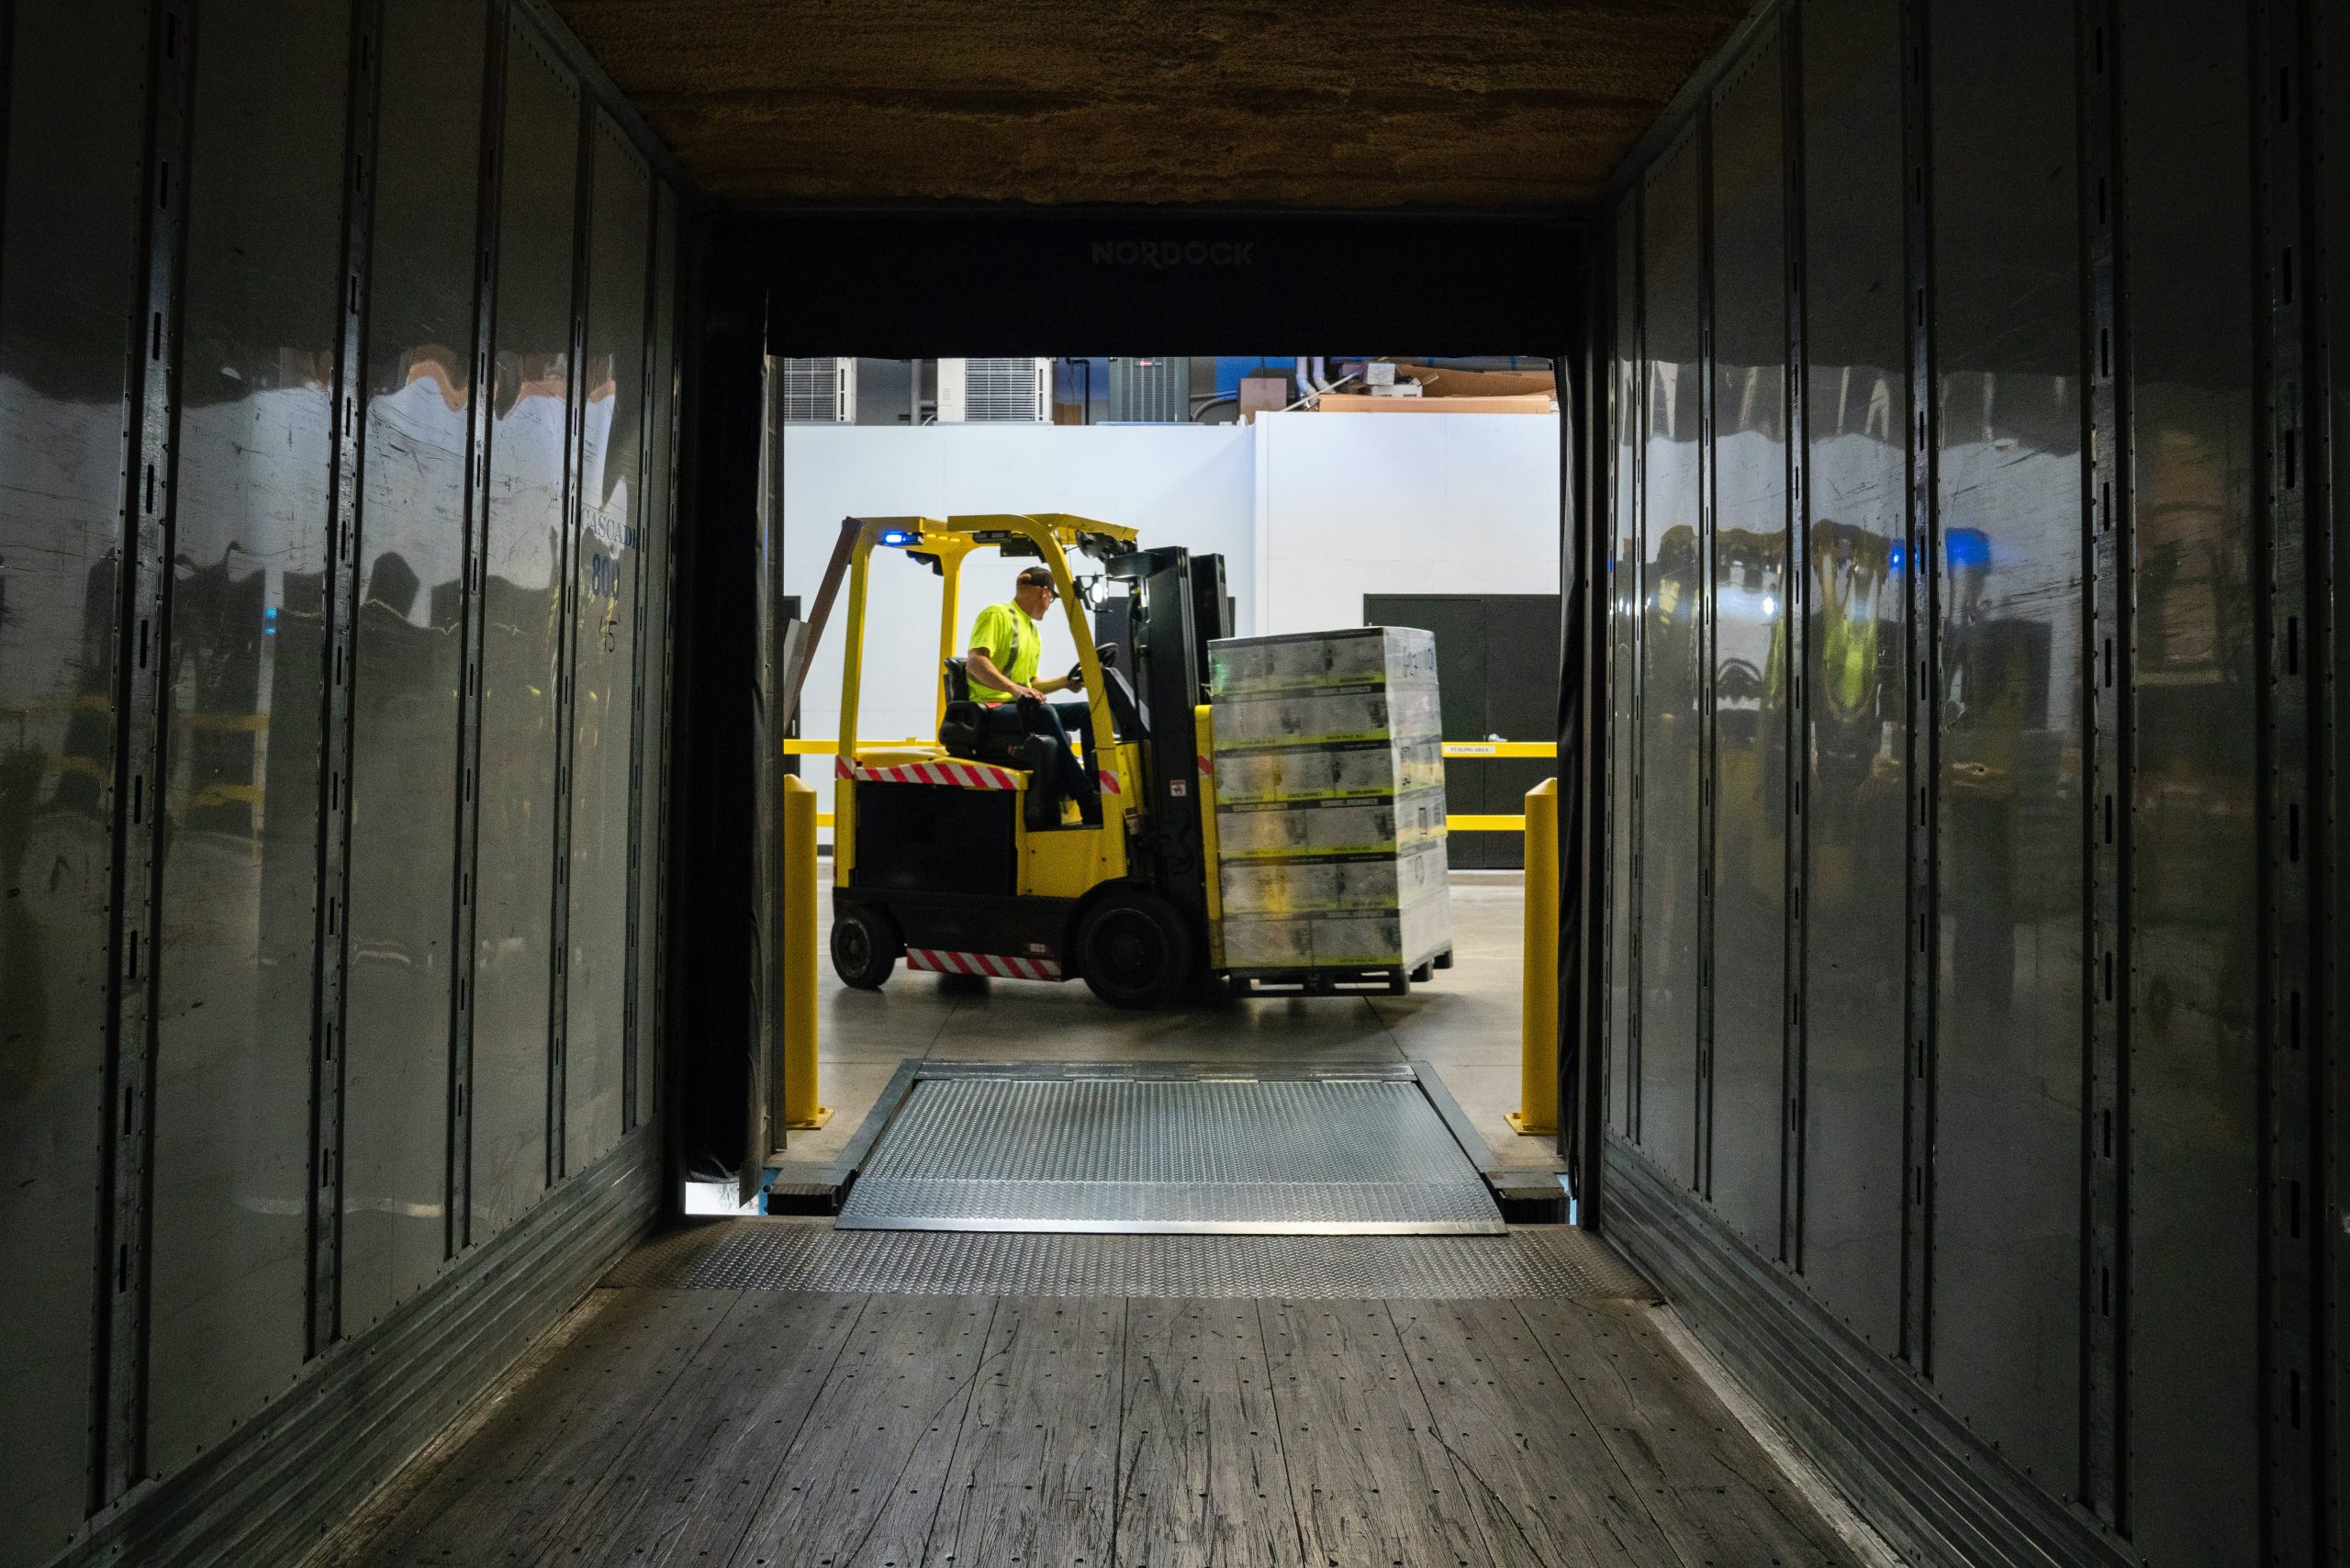 forklift carrying stacks of boxes at the end of a hallway